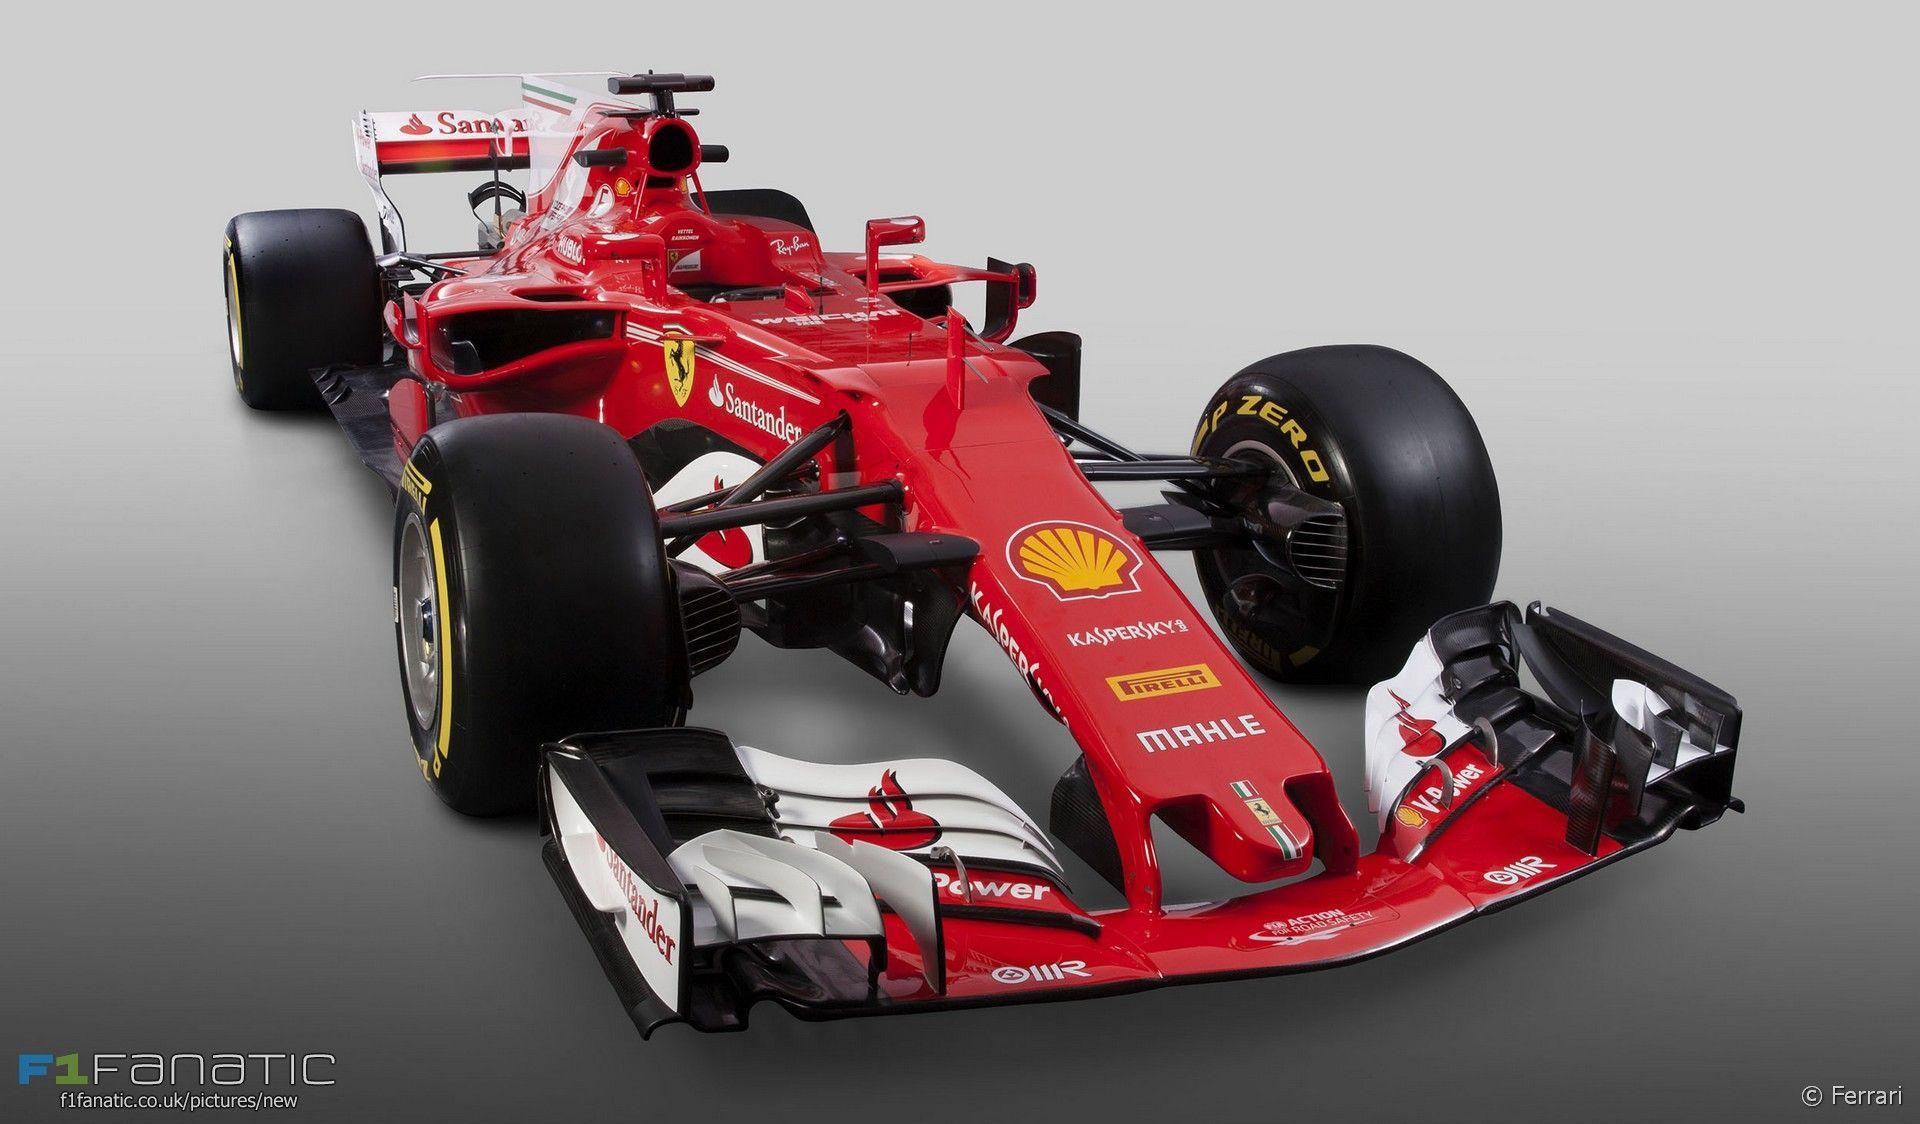 Picture: Ferrari&;s new F1 car for 2017 revealed